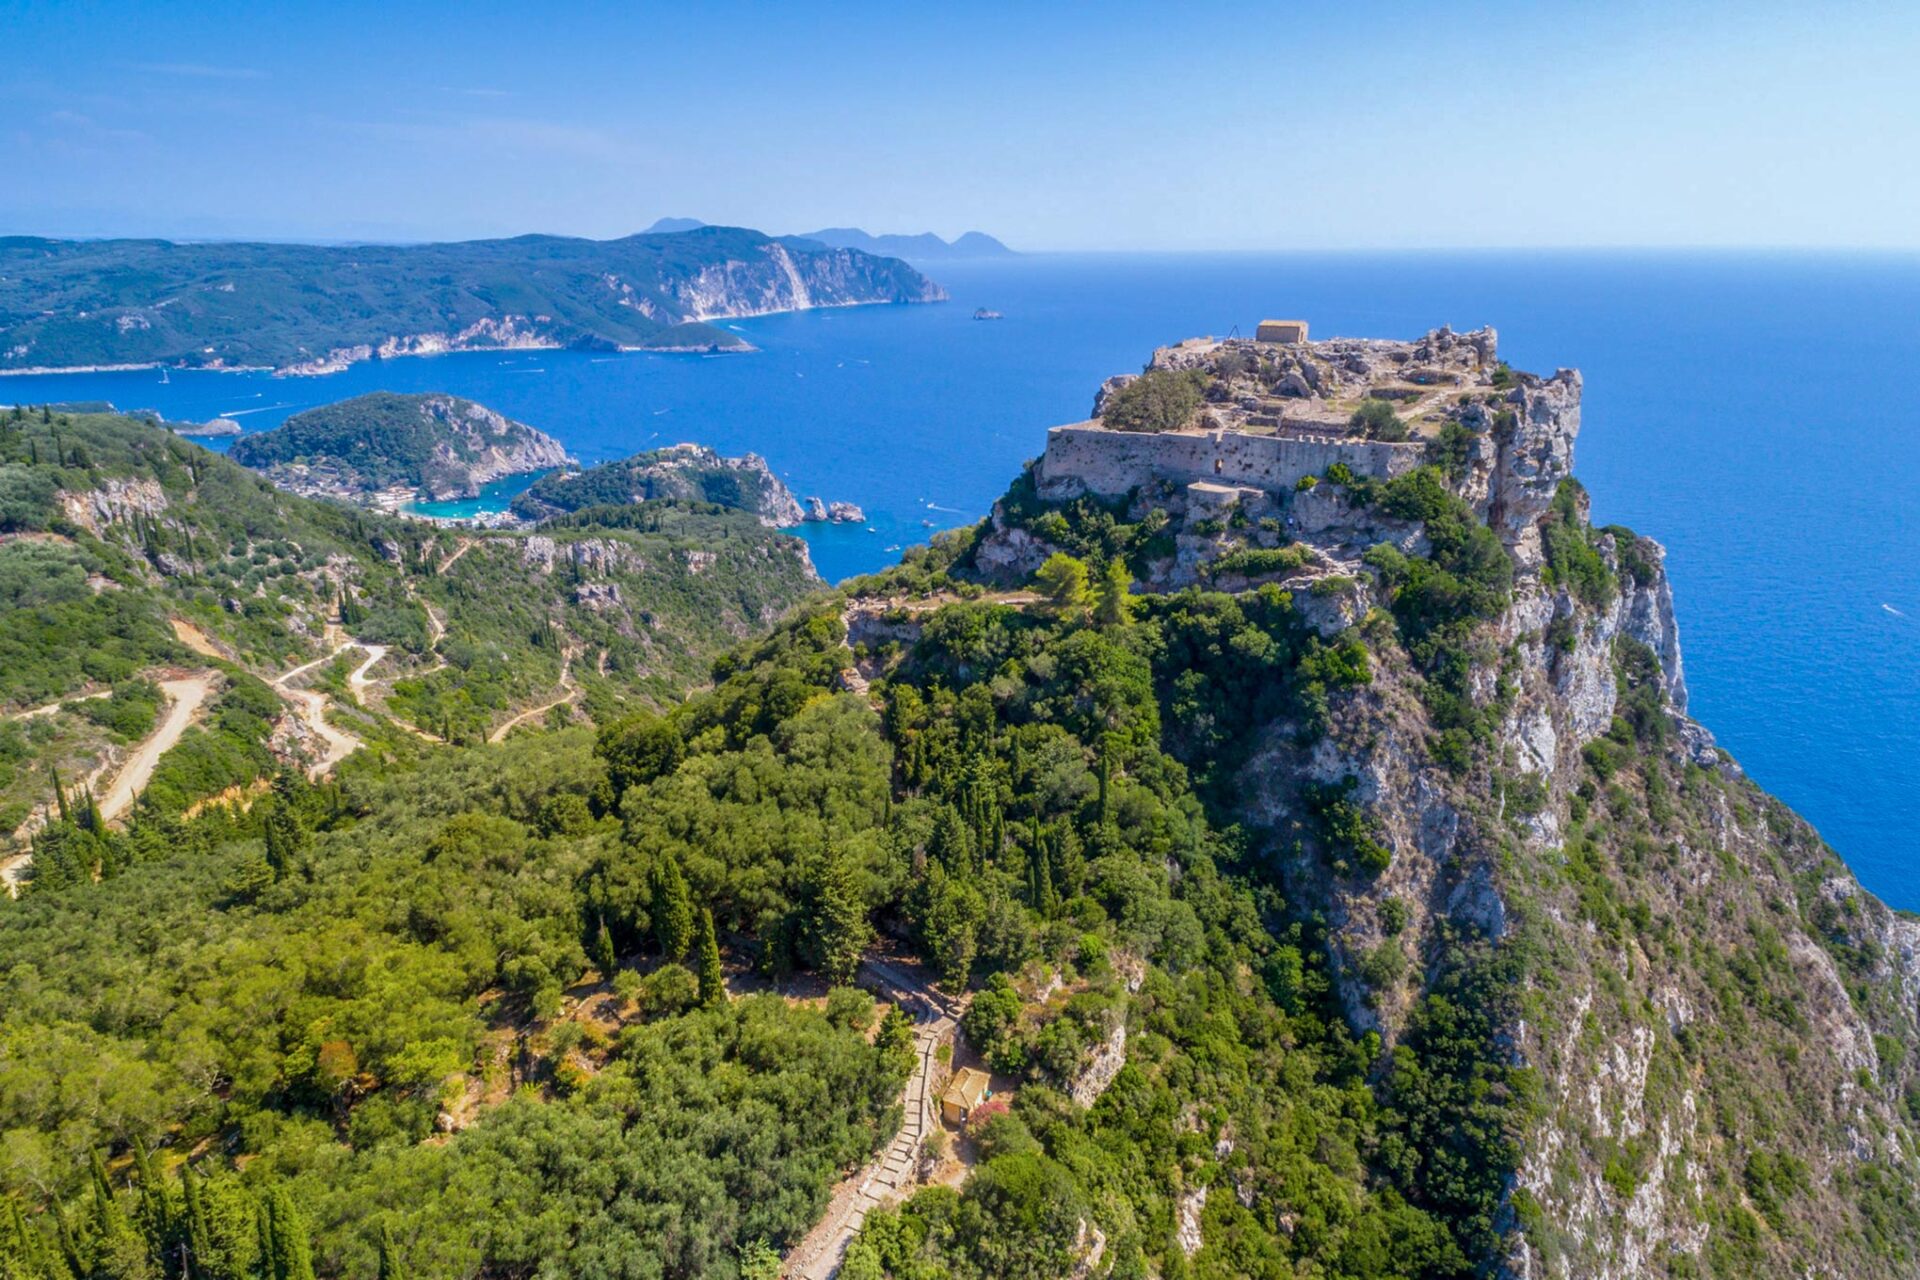 Corfu Small Group Tour: Admire the Most Iconic Sights of Corfu in One Day